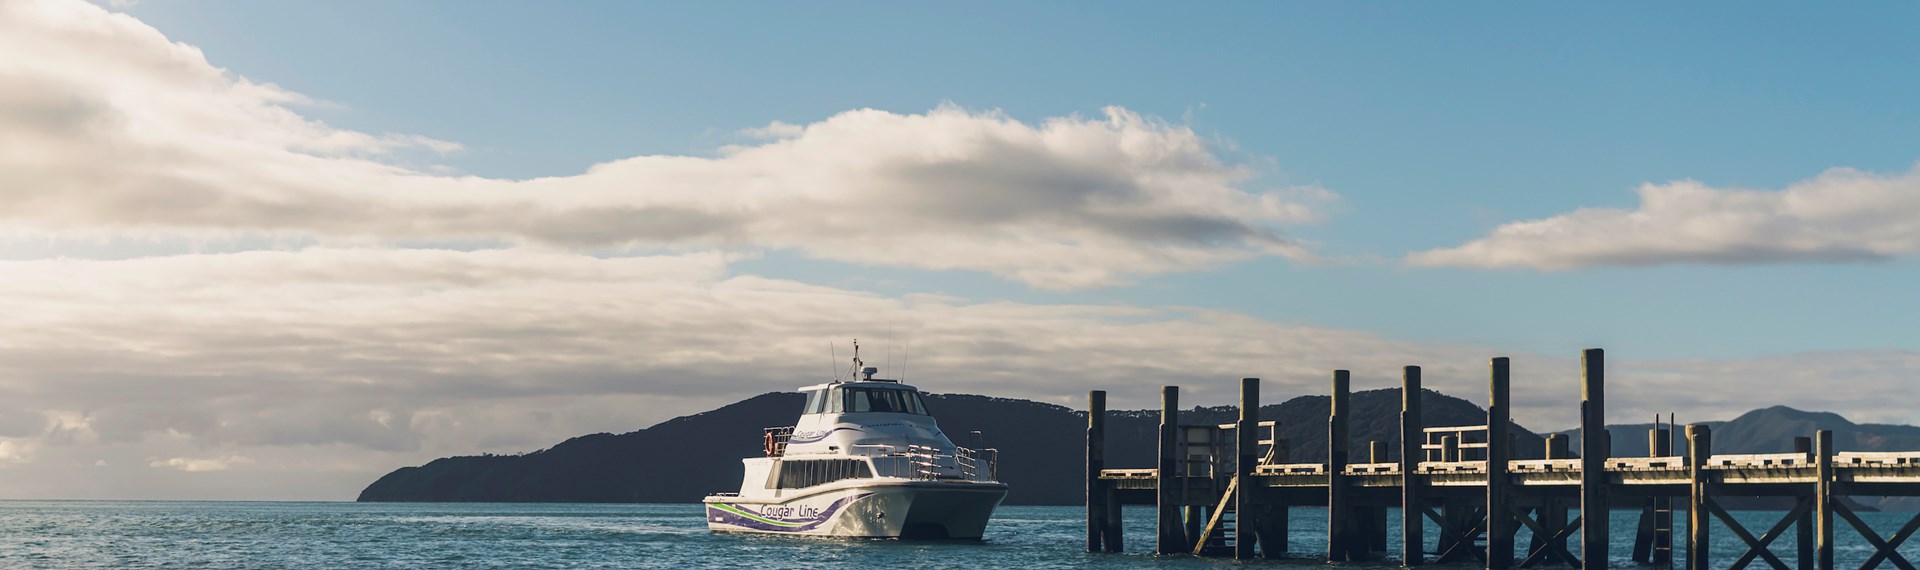 A Cougar Line boat approaches the jetty at Ship Cove/Meretoto at the start of the Queen Charlotte Track in outer Queen Charlotte Sound/Tōtaranui in the Marlborough Sounds, New Zealand..